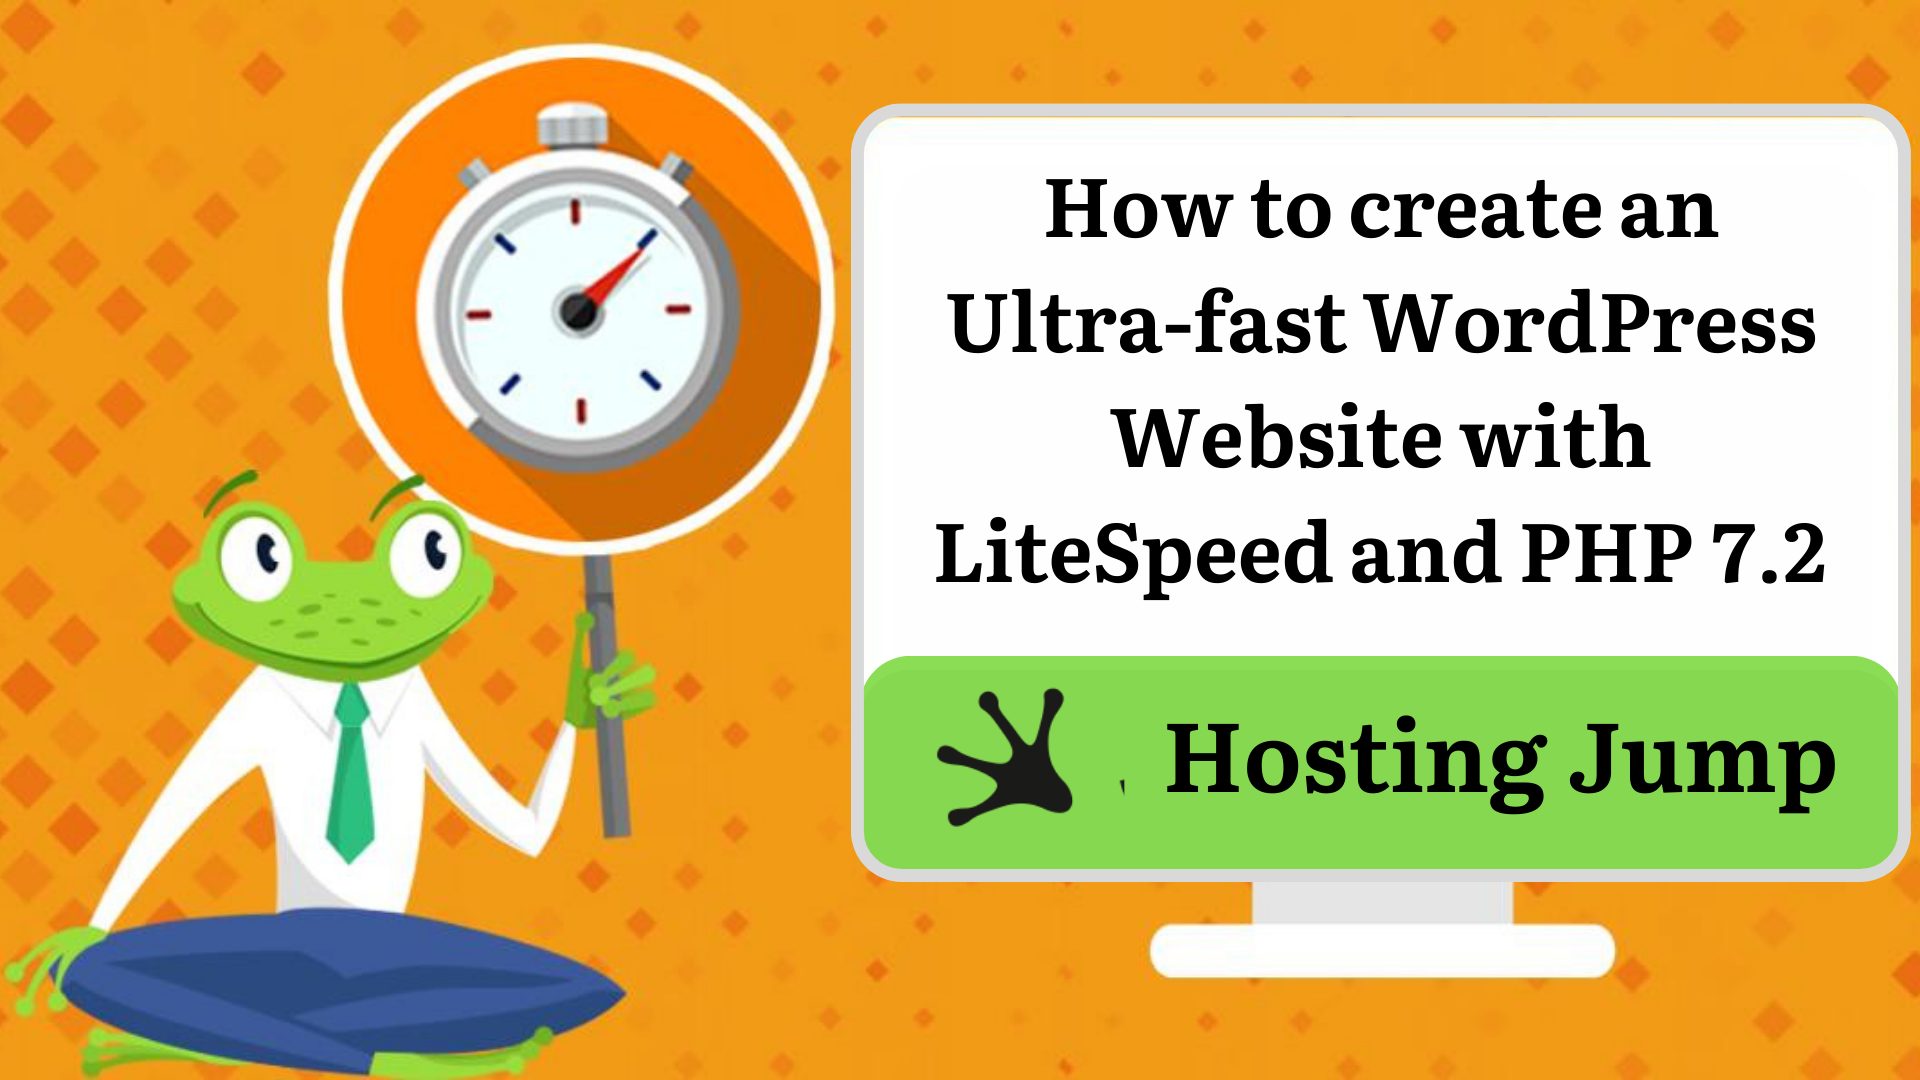 How to Build a Fast WordPress Website with LiteSpeed and PHP 7.2